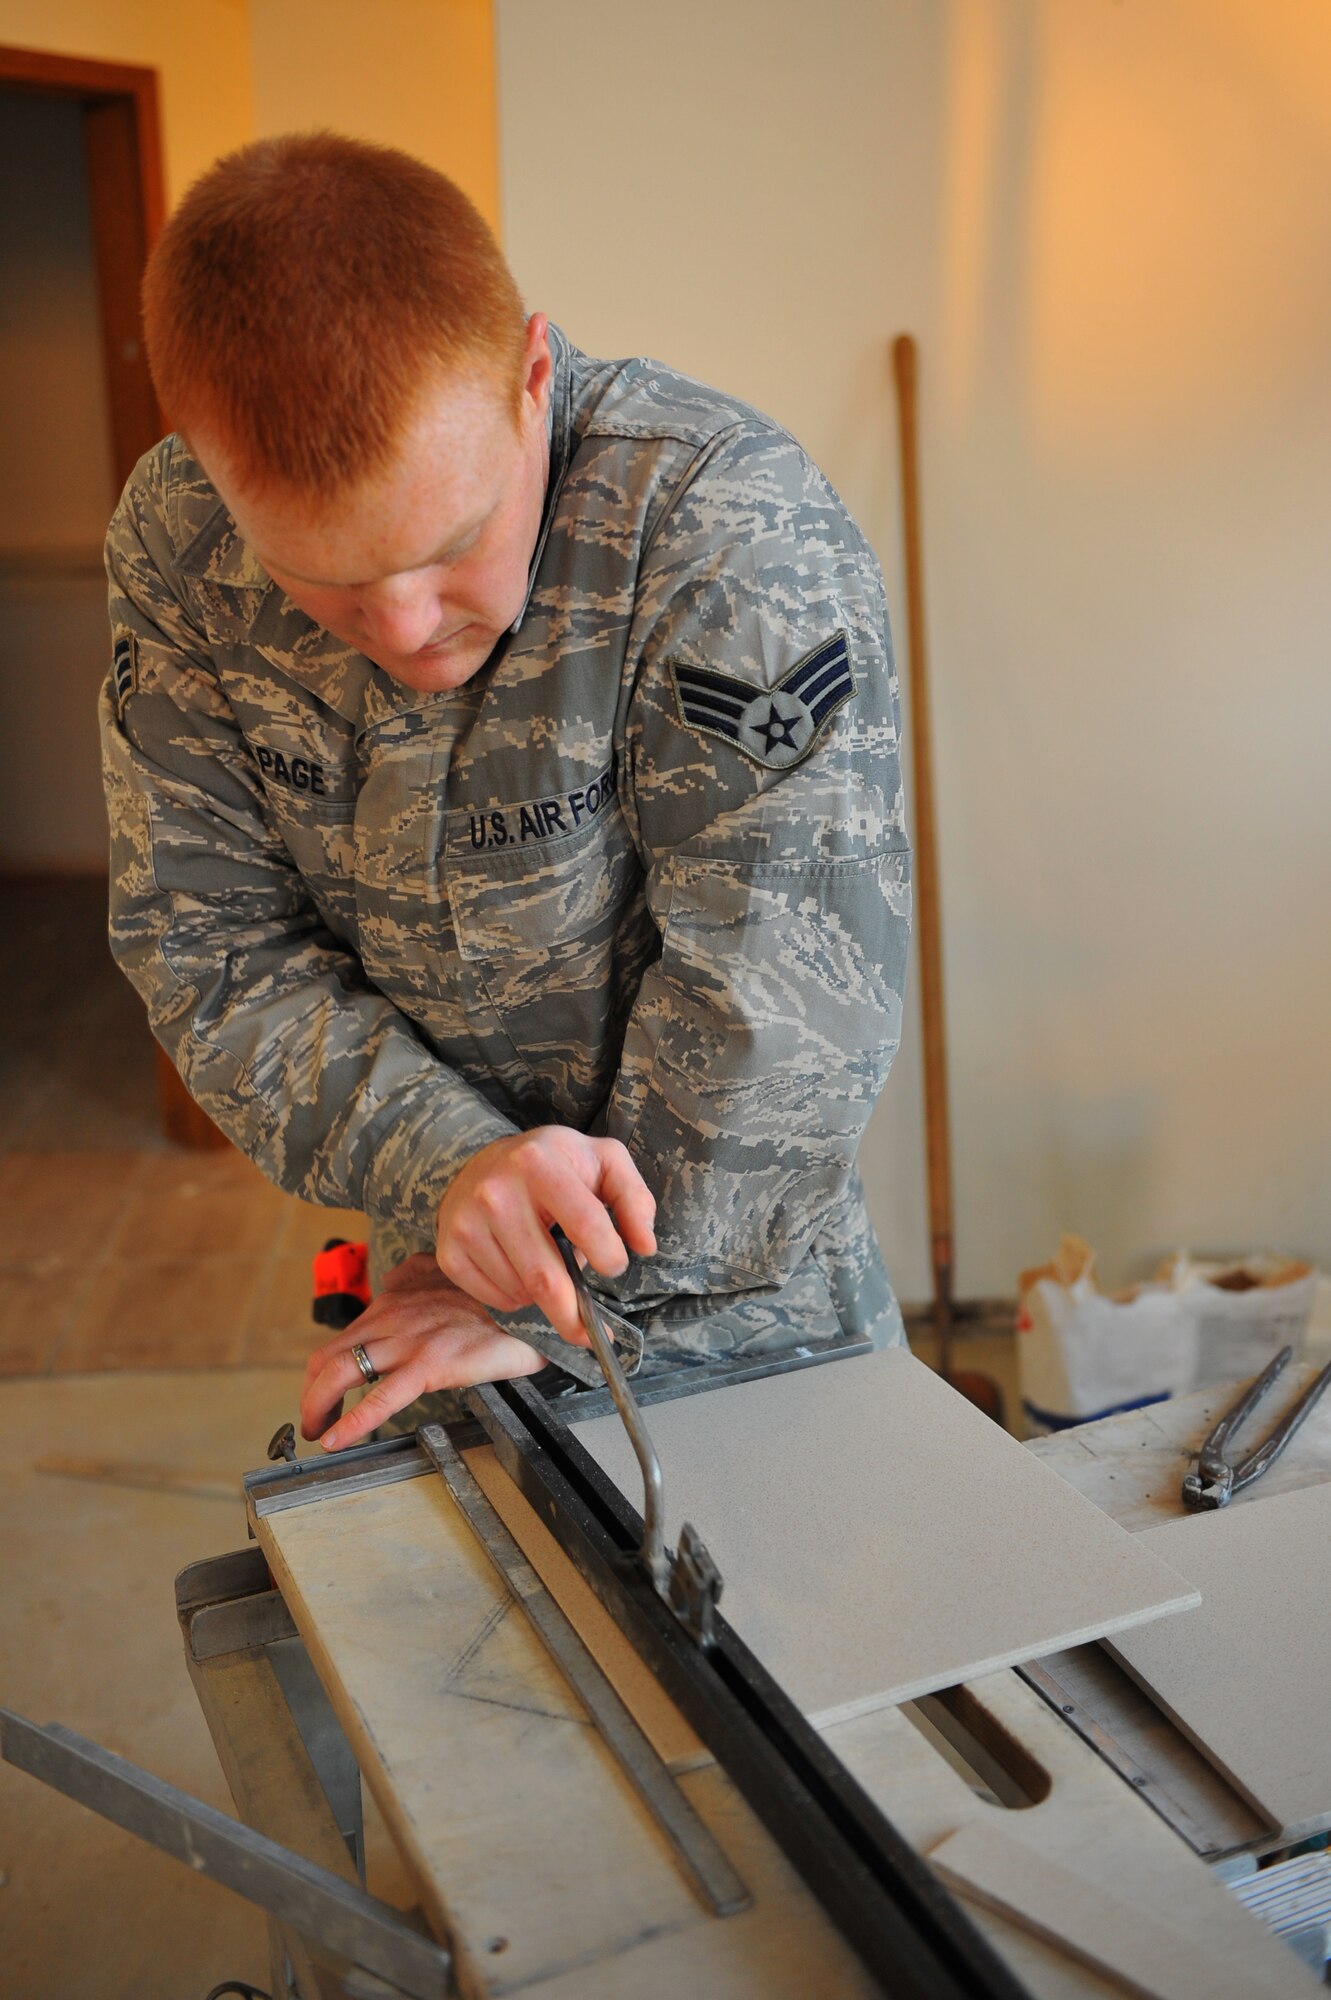 SPANGDAHLEM AIR BASE, Germany – Senior Airman Garth Page, 52nd Civil Engineer Squadron structures journeyman, cuts a tile inside the Mosel Dining Facility here Nov. 16. The 52nd CES is renovating the facility, to include, new flooring, paint, service line and storage facilities. Completion of the facility is scheduled for Jan. 15, 2012. (U.S. Air Force photo/Airman 1st Class Dillon Davis)